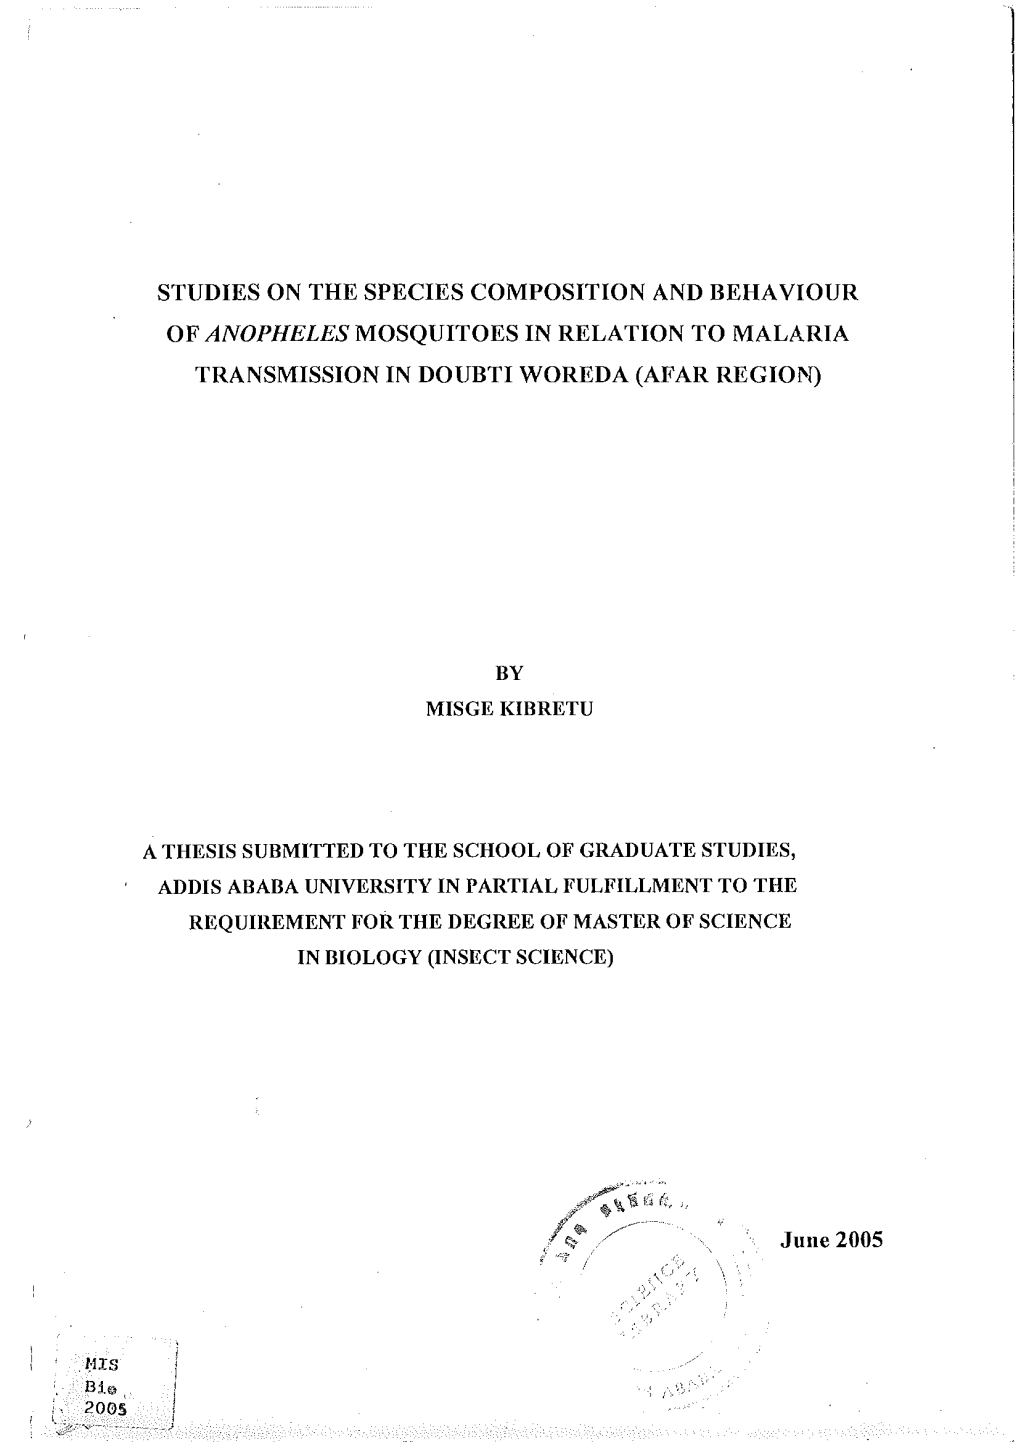 Studies on the Species Composition and Behaviour of Anopheles Mosquitoes in Relation to Malaria Transmission in Doubti Woreda (Afar Region)